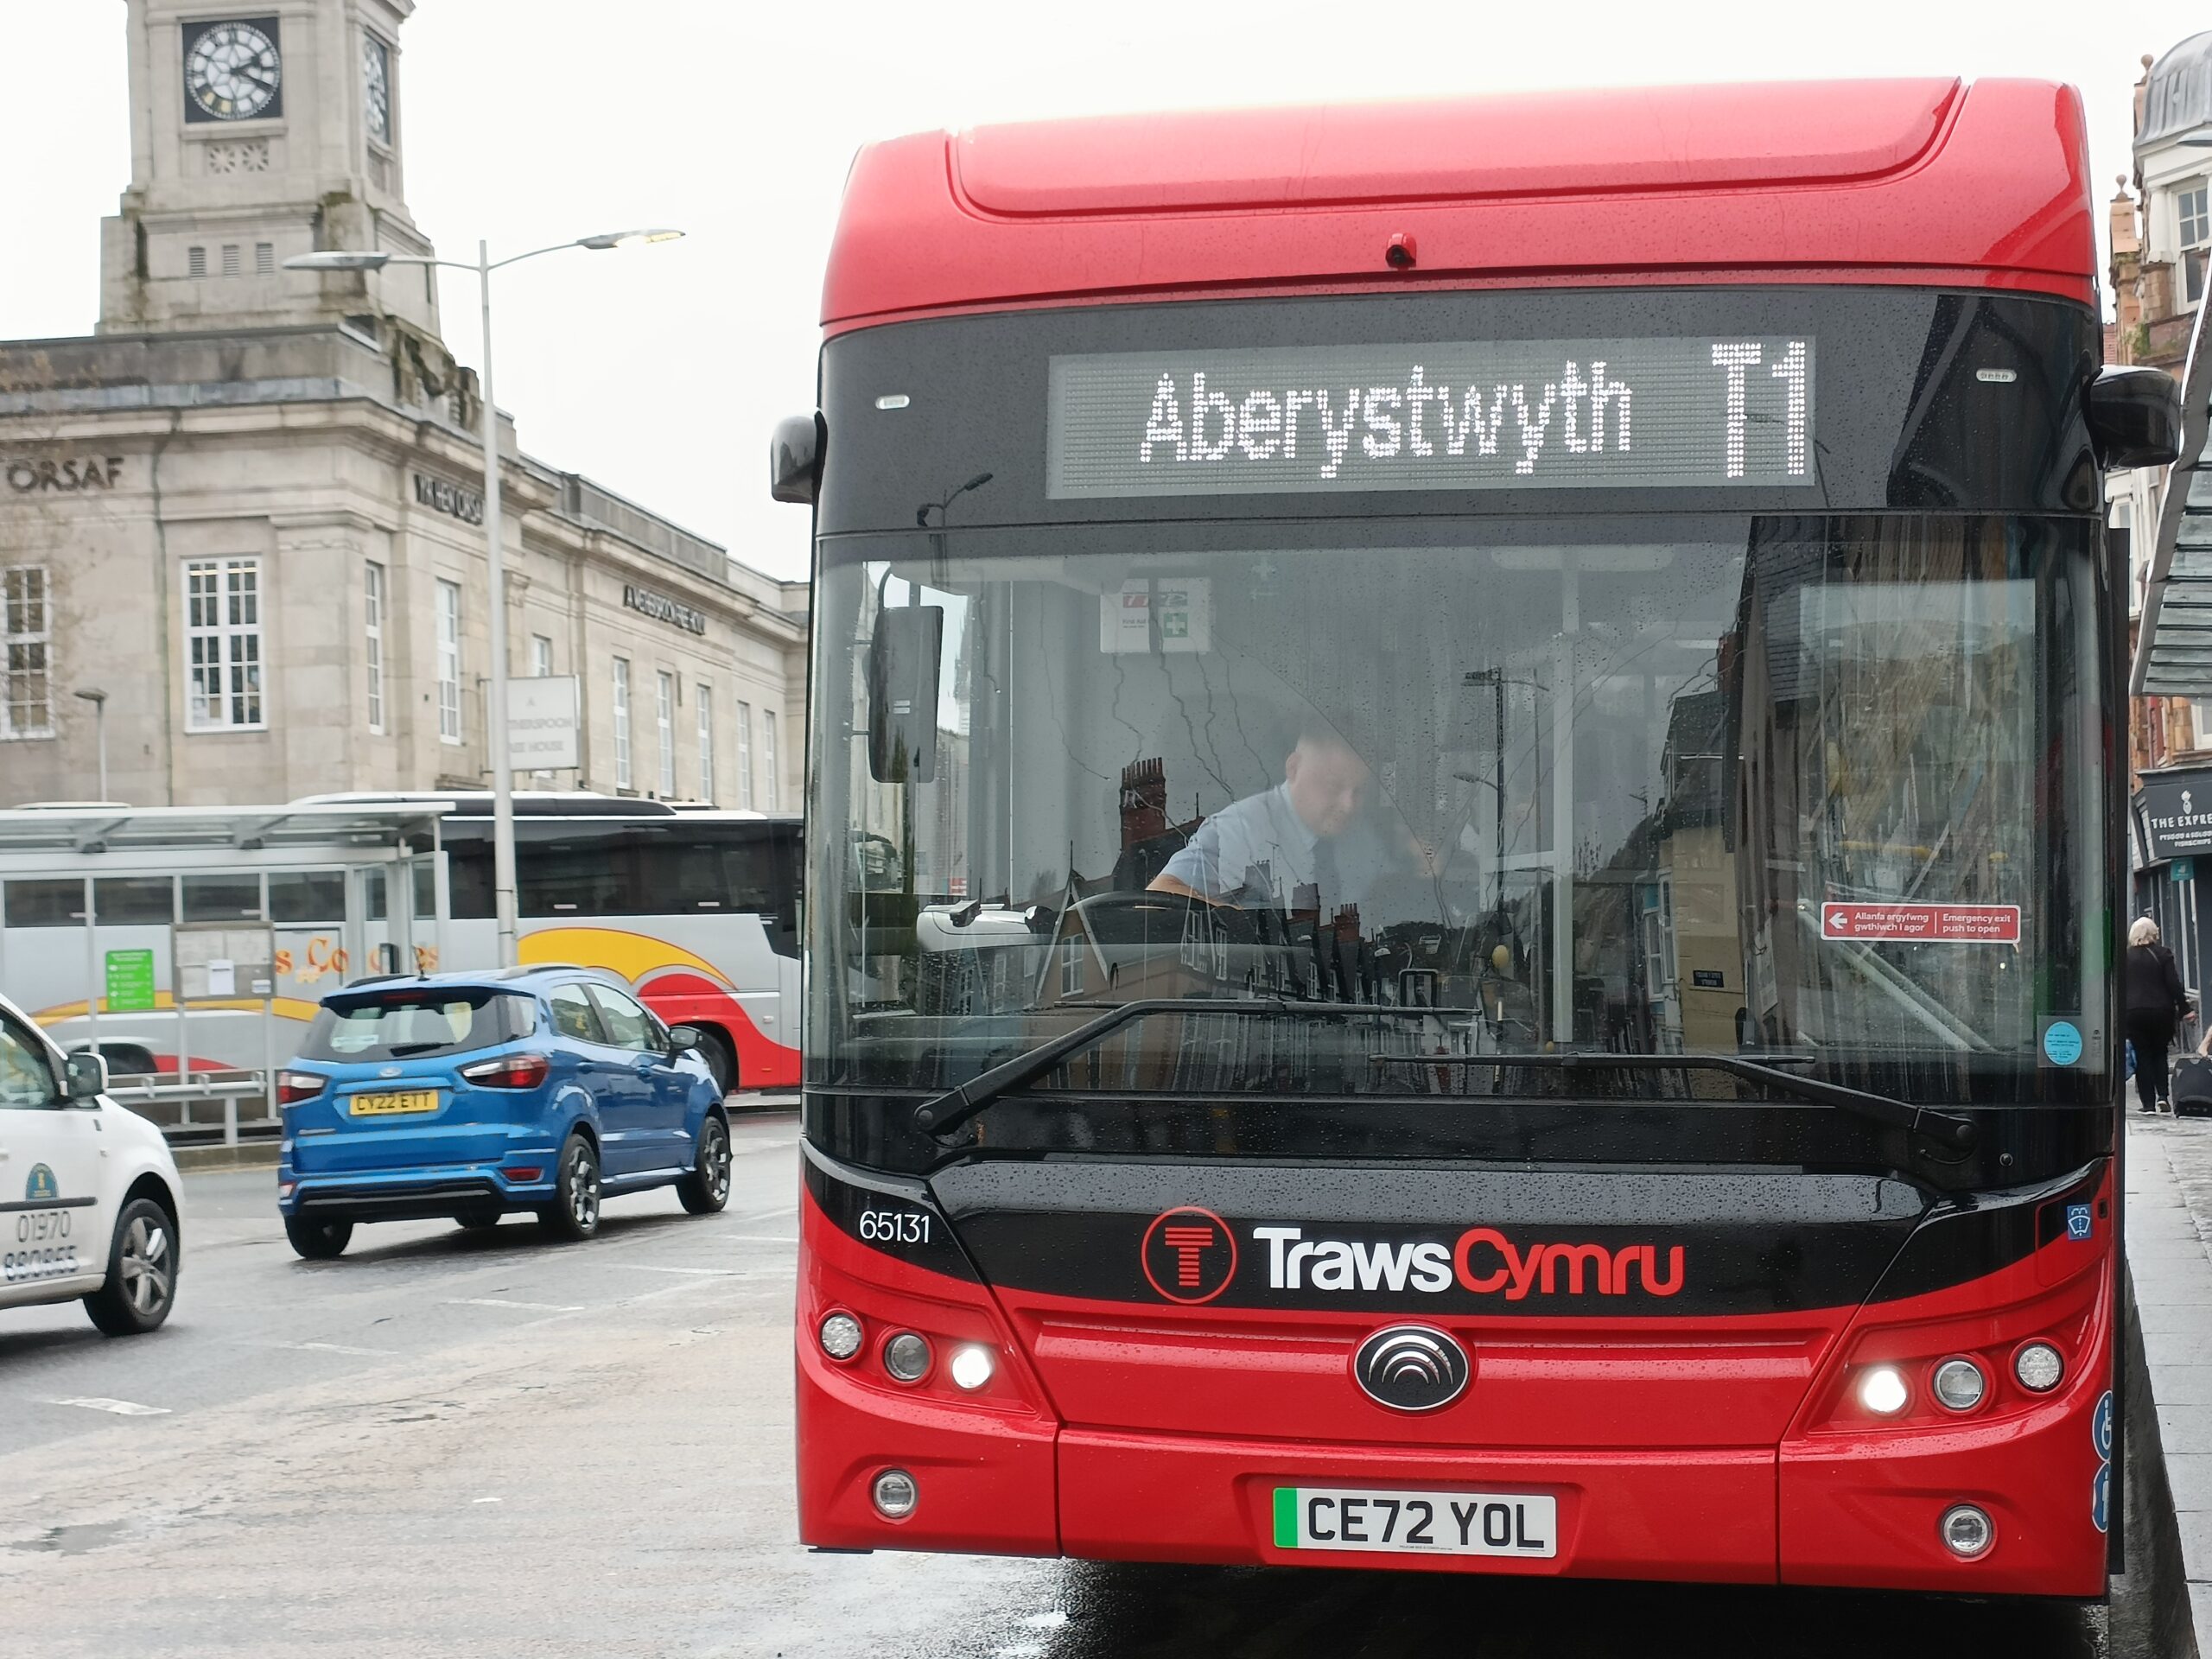 Transport for Wales offers half price day tickets for festive season when traveling on Traws Cymru routes